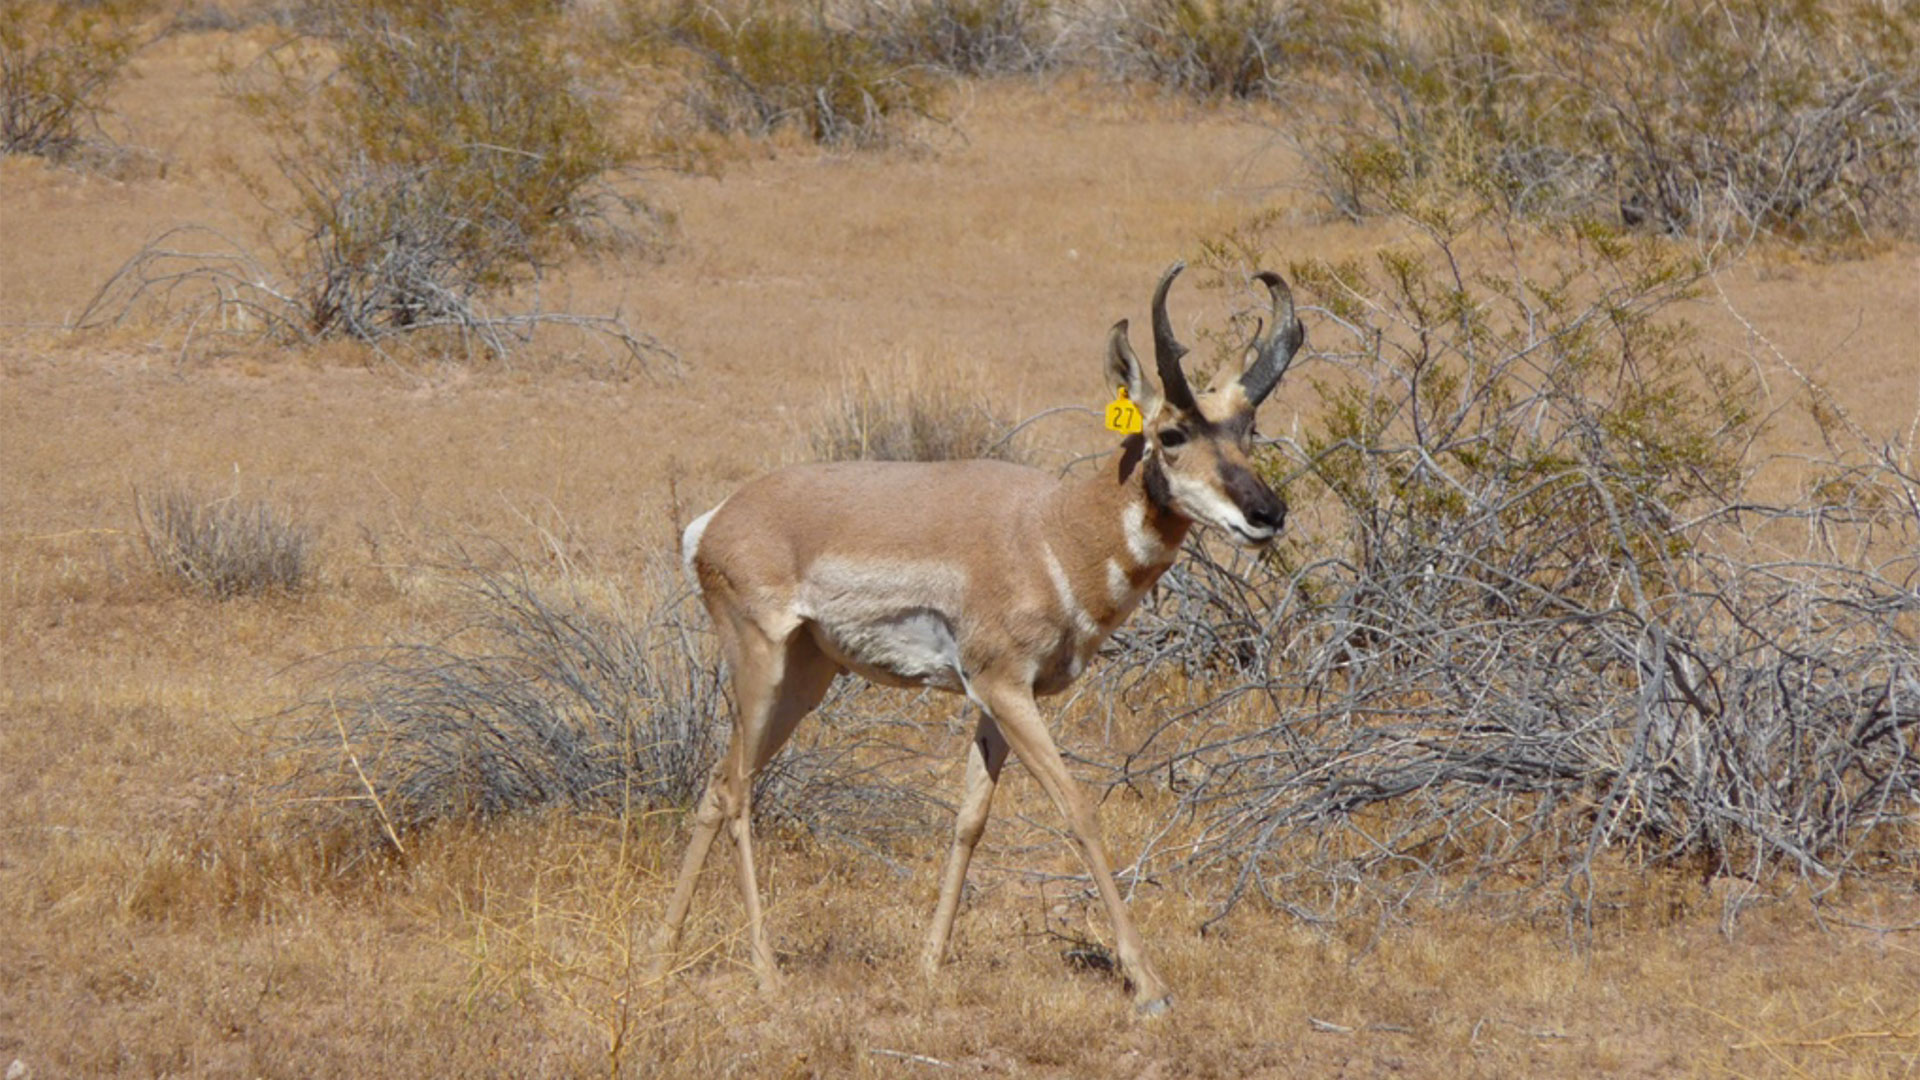 Sonoran pronghorn are one of the federally endangered species USFWS says could be harmed by new border fencing.